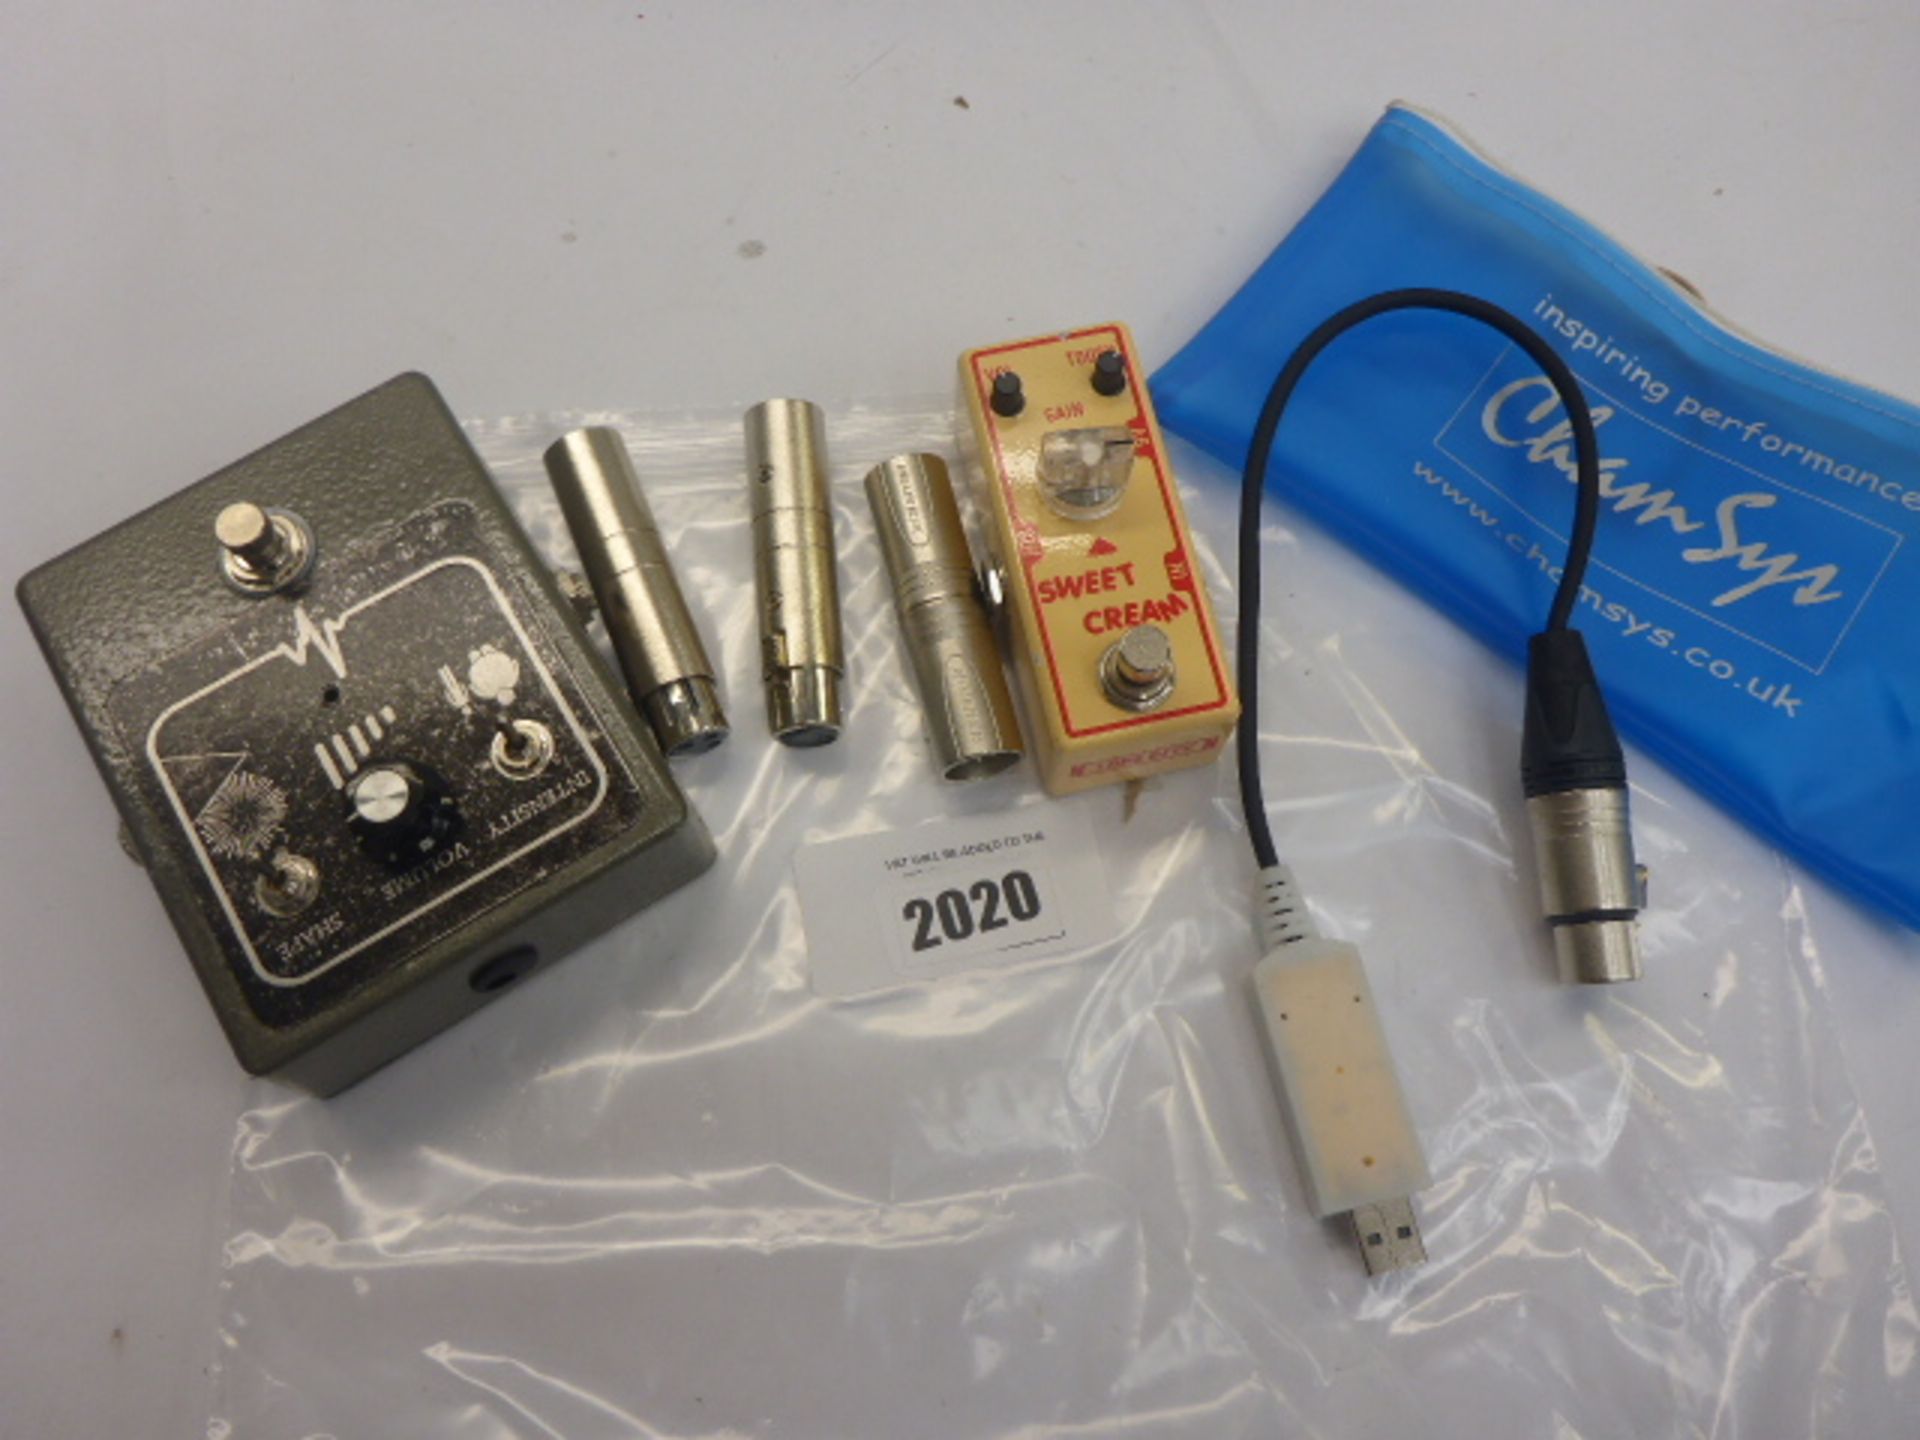 2 guitar pedals and microphone adapters